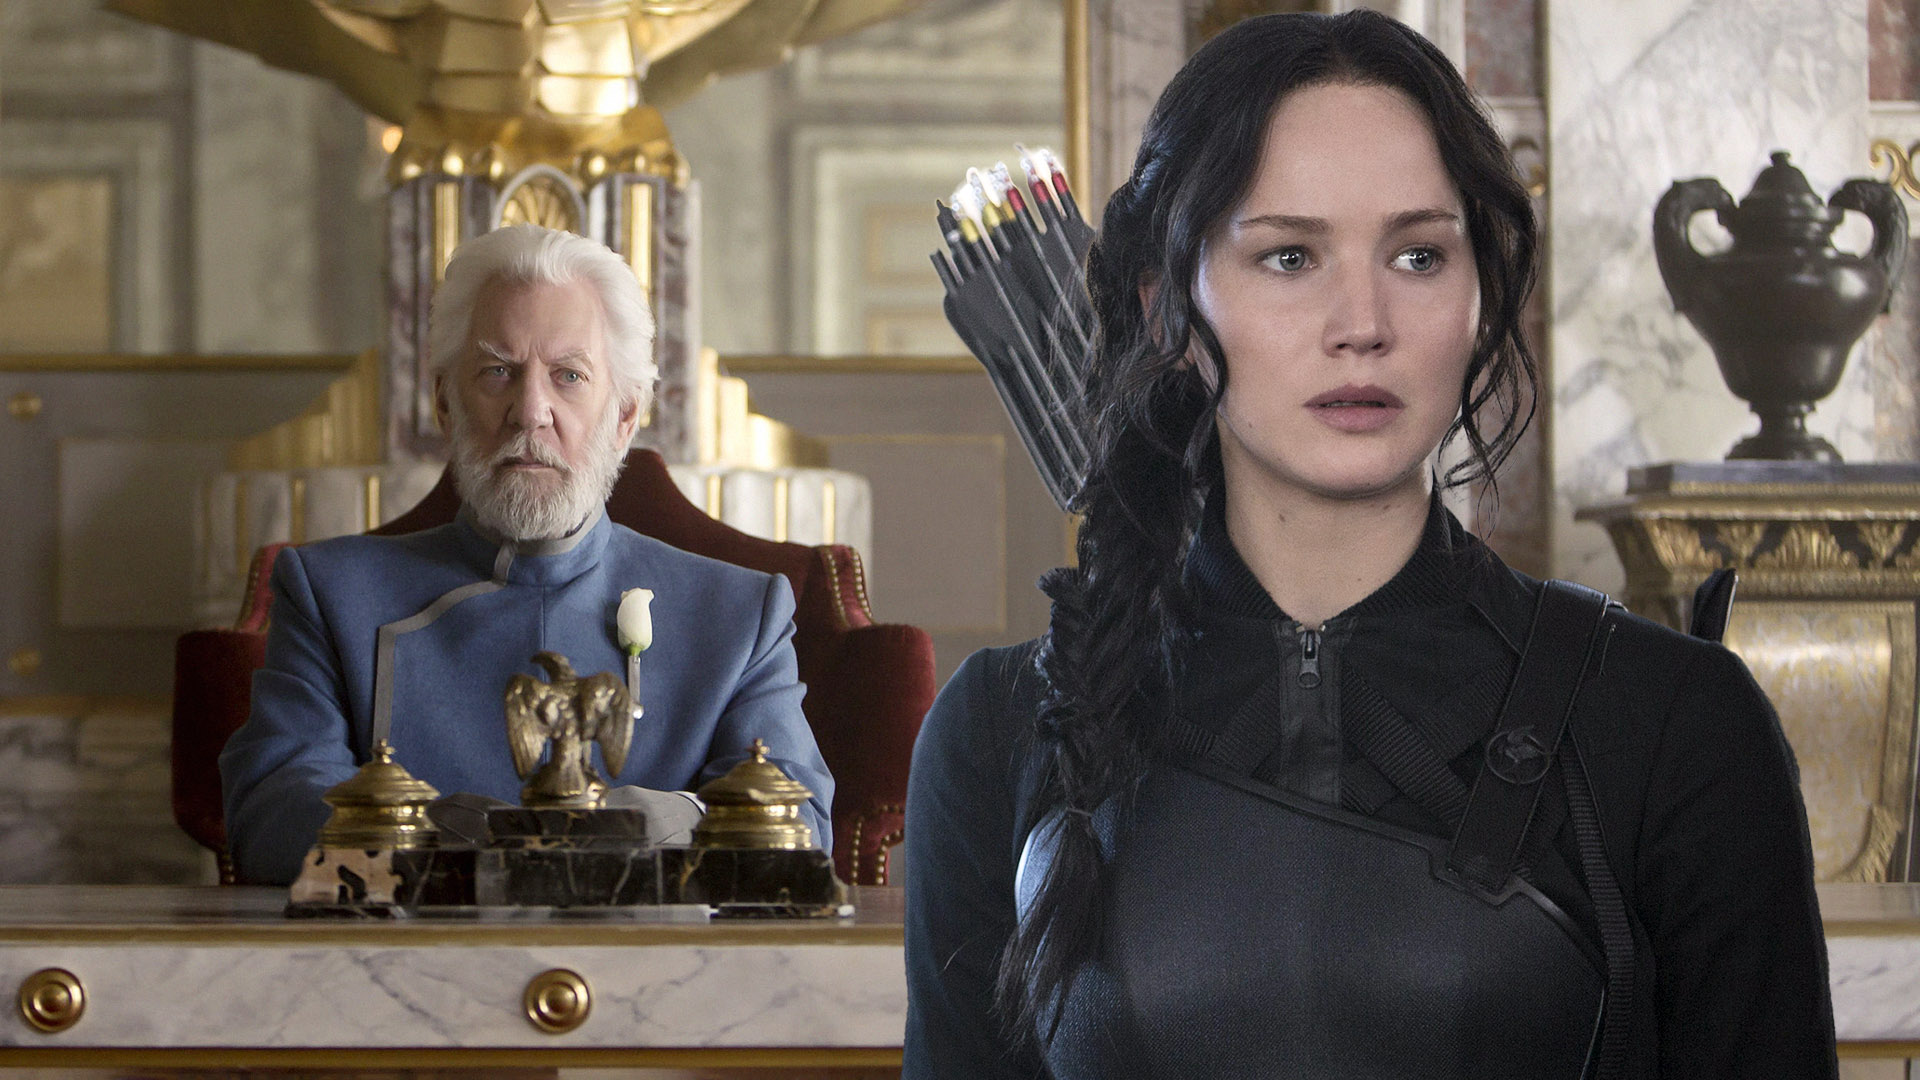 Viral Hunger Games Theory About Katniss & President Snow's Relationship Has Fans Fuming